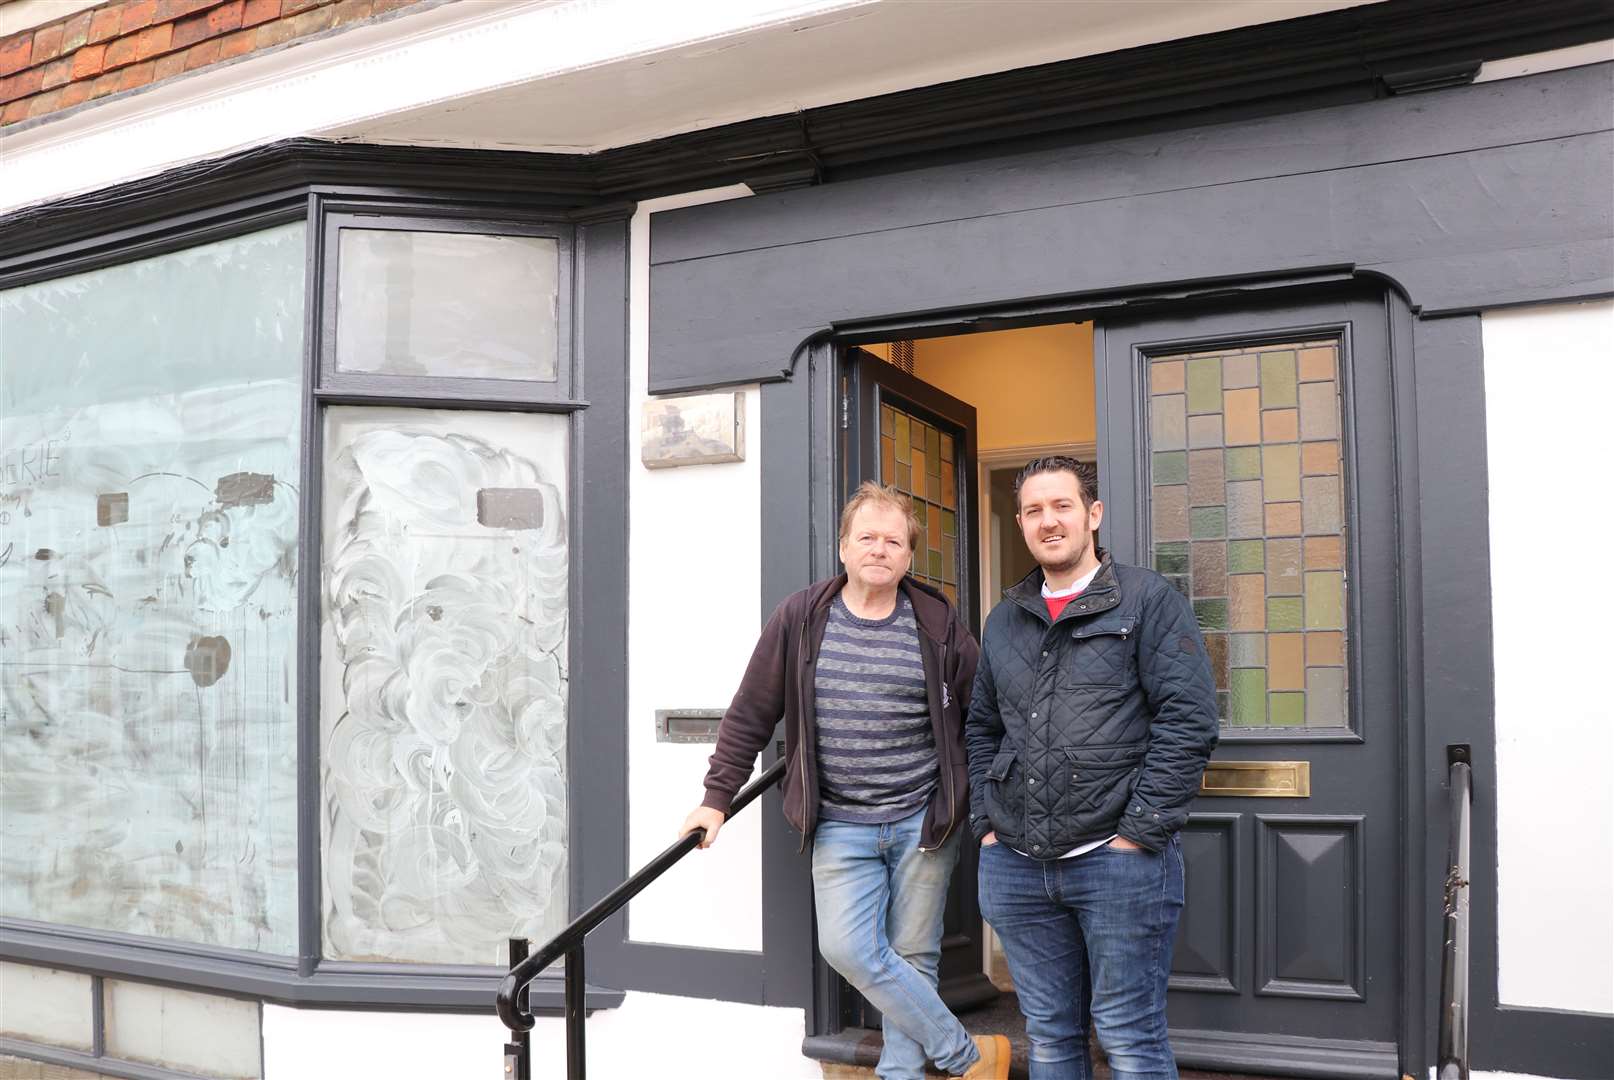 Graham Garret and Chris Underwood will be opening Artisserie in the High Street (52538270)